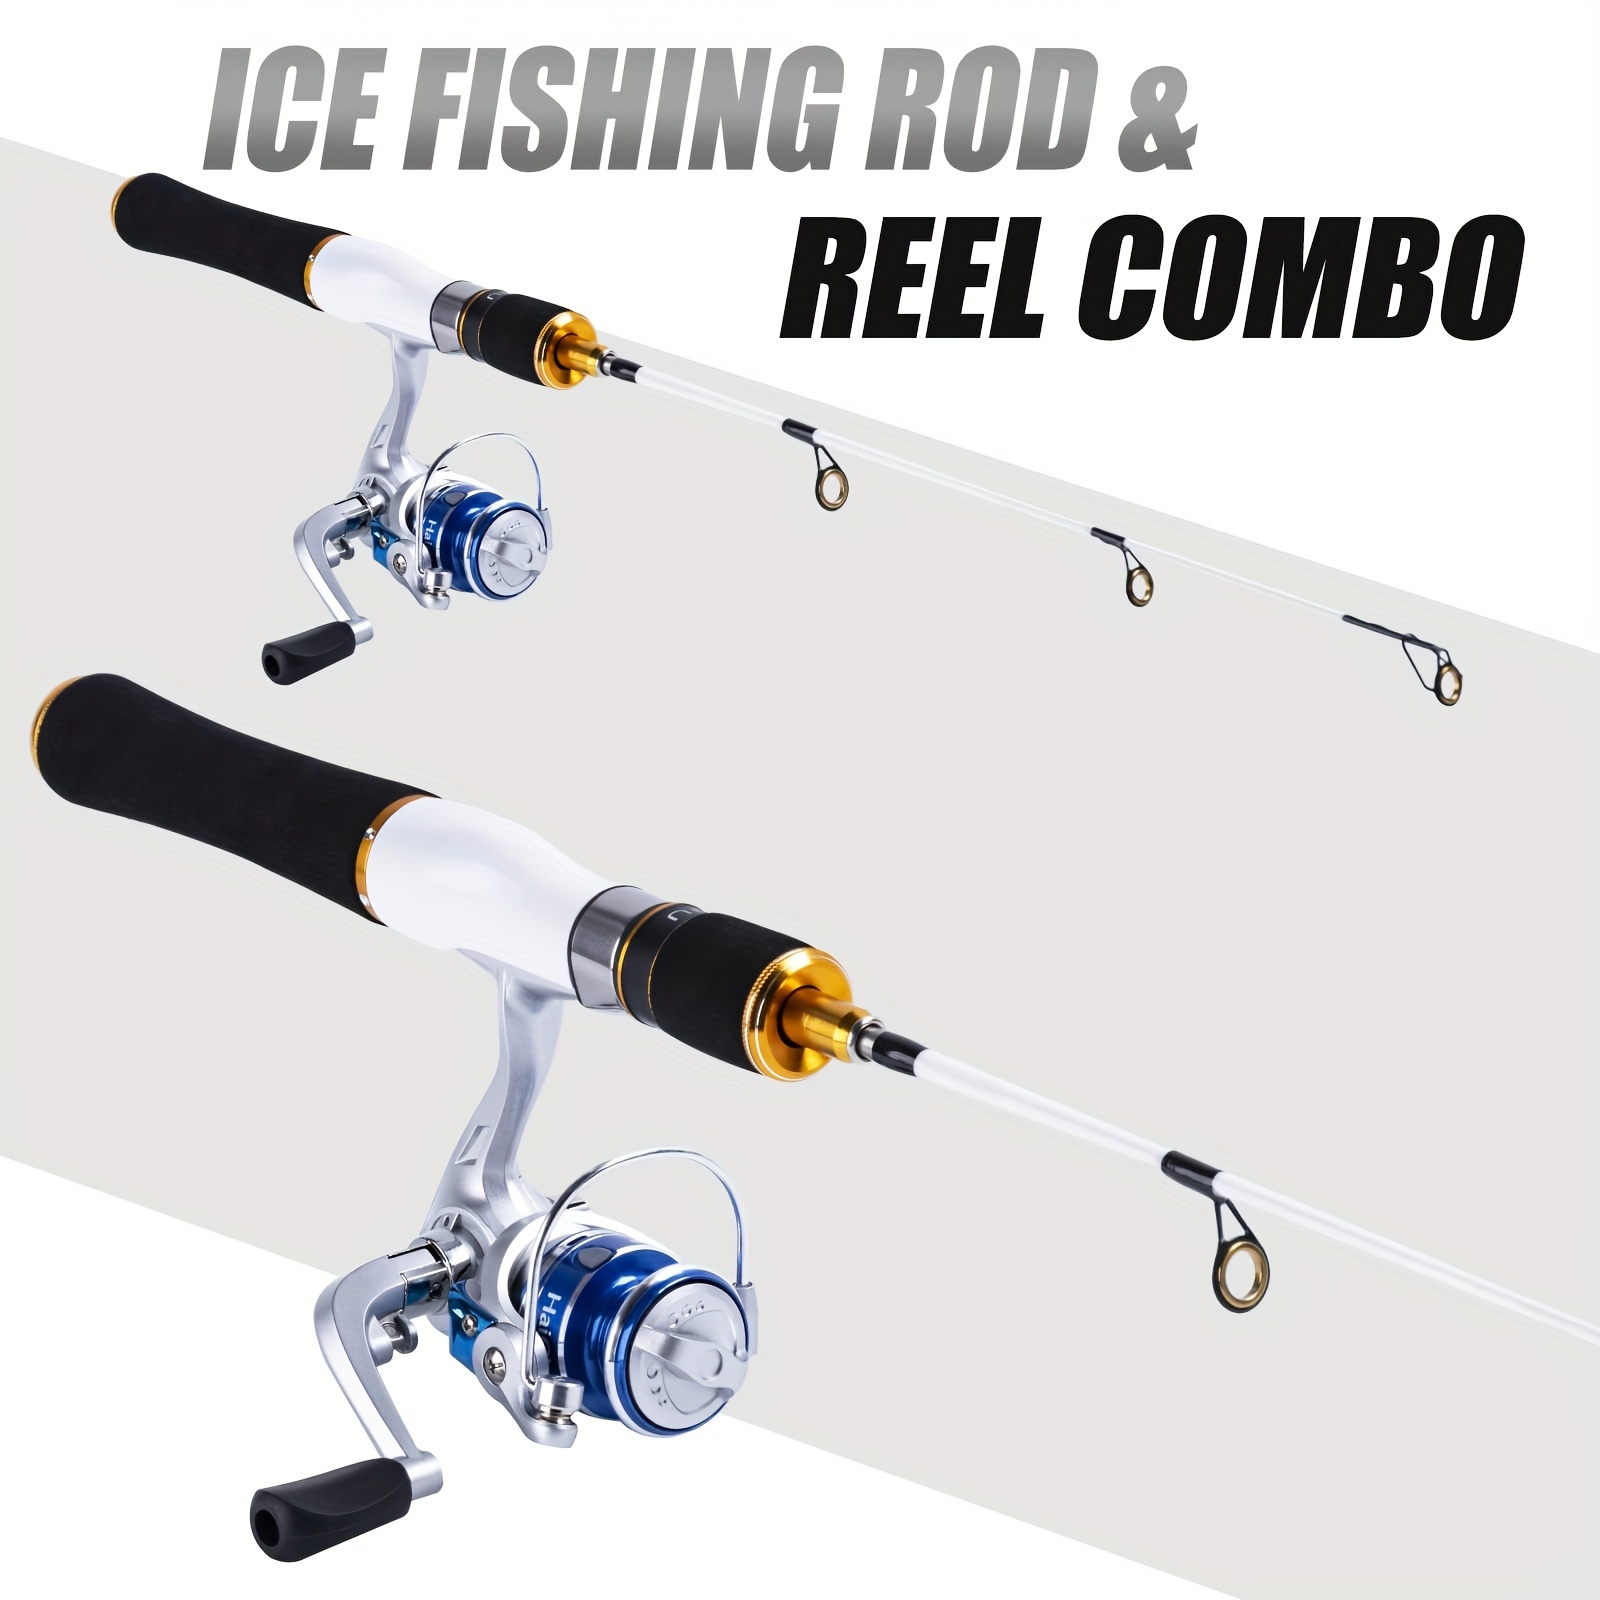 Crappie Fishing Rods, Reels and Combos, Crappie Fishing